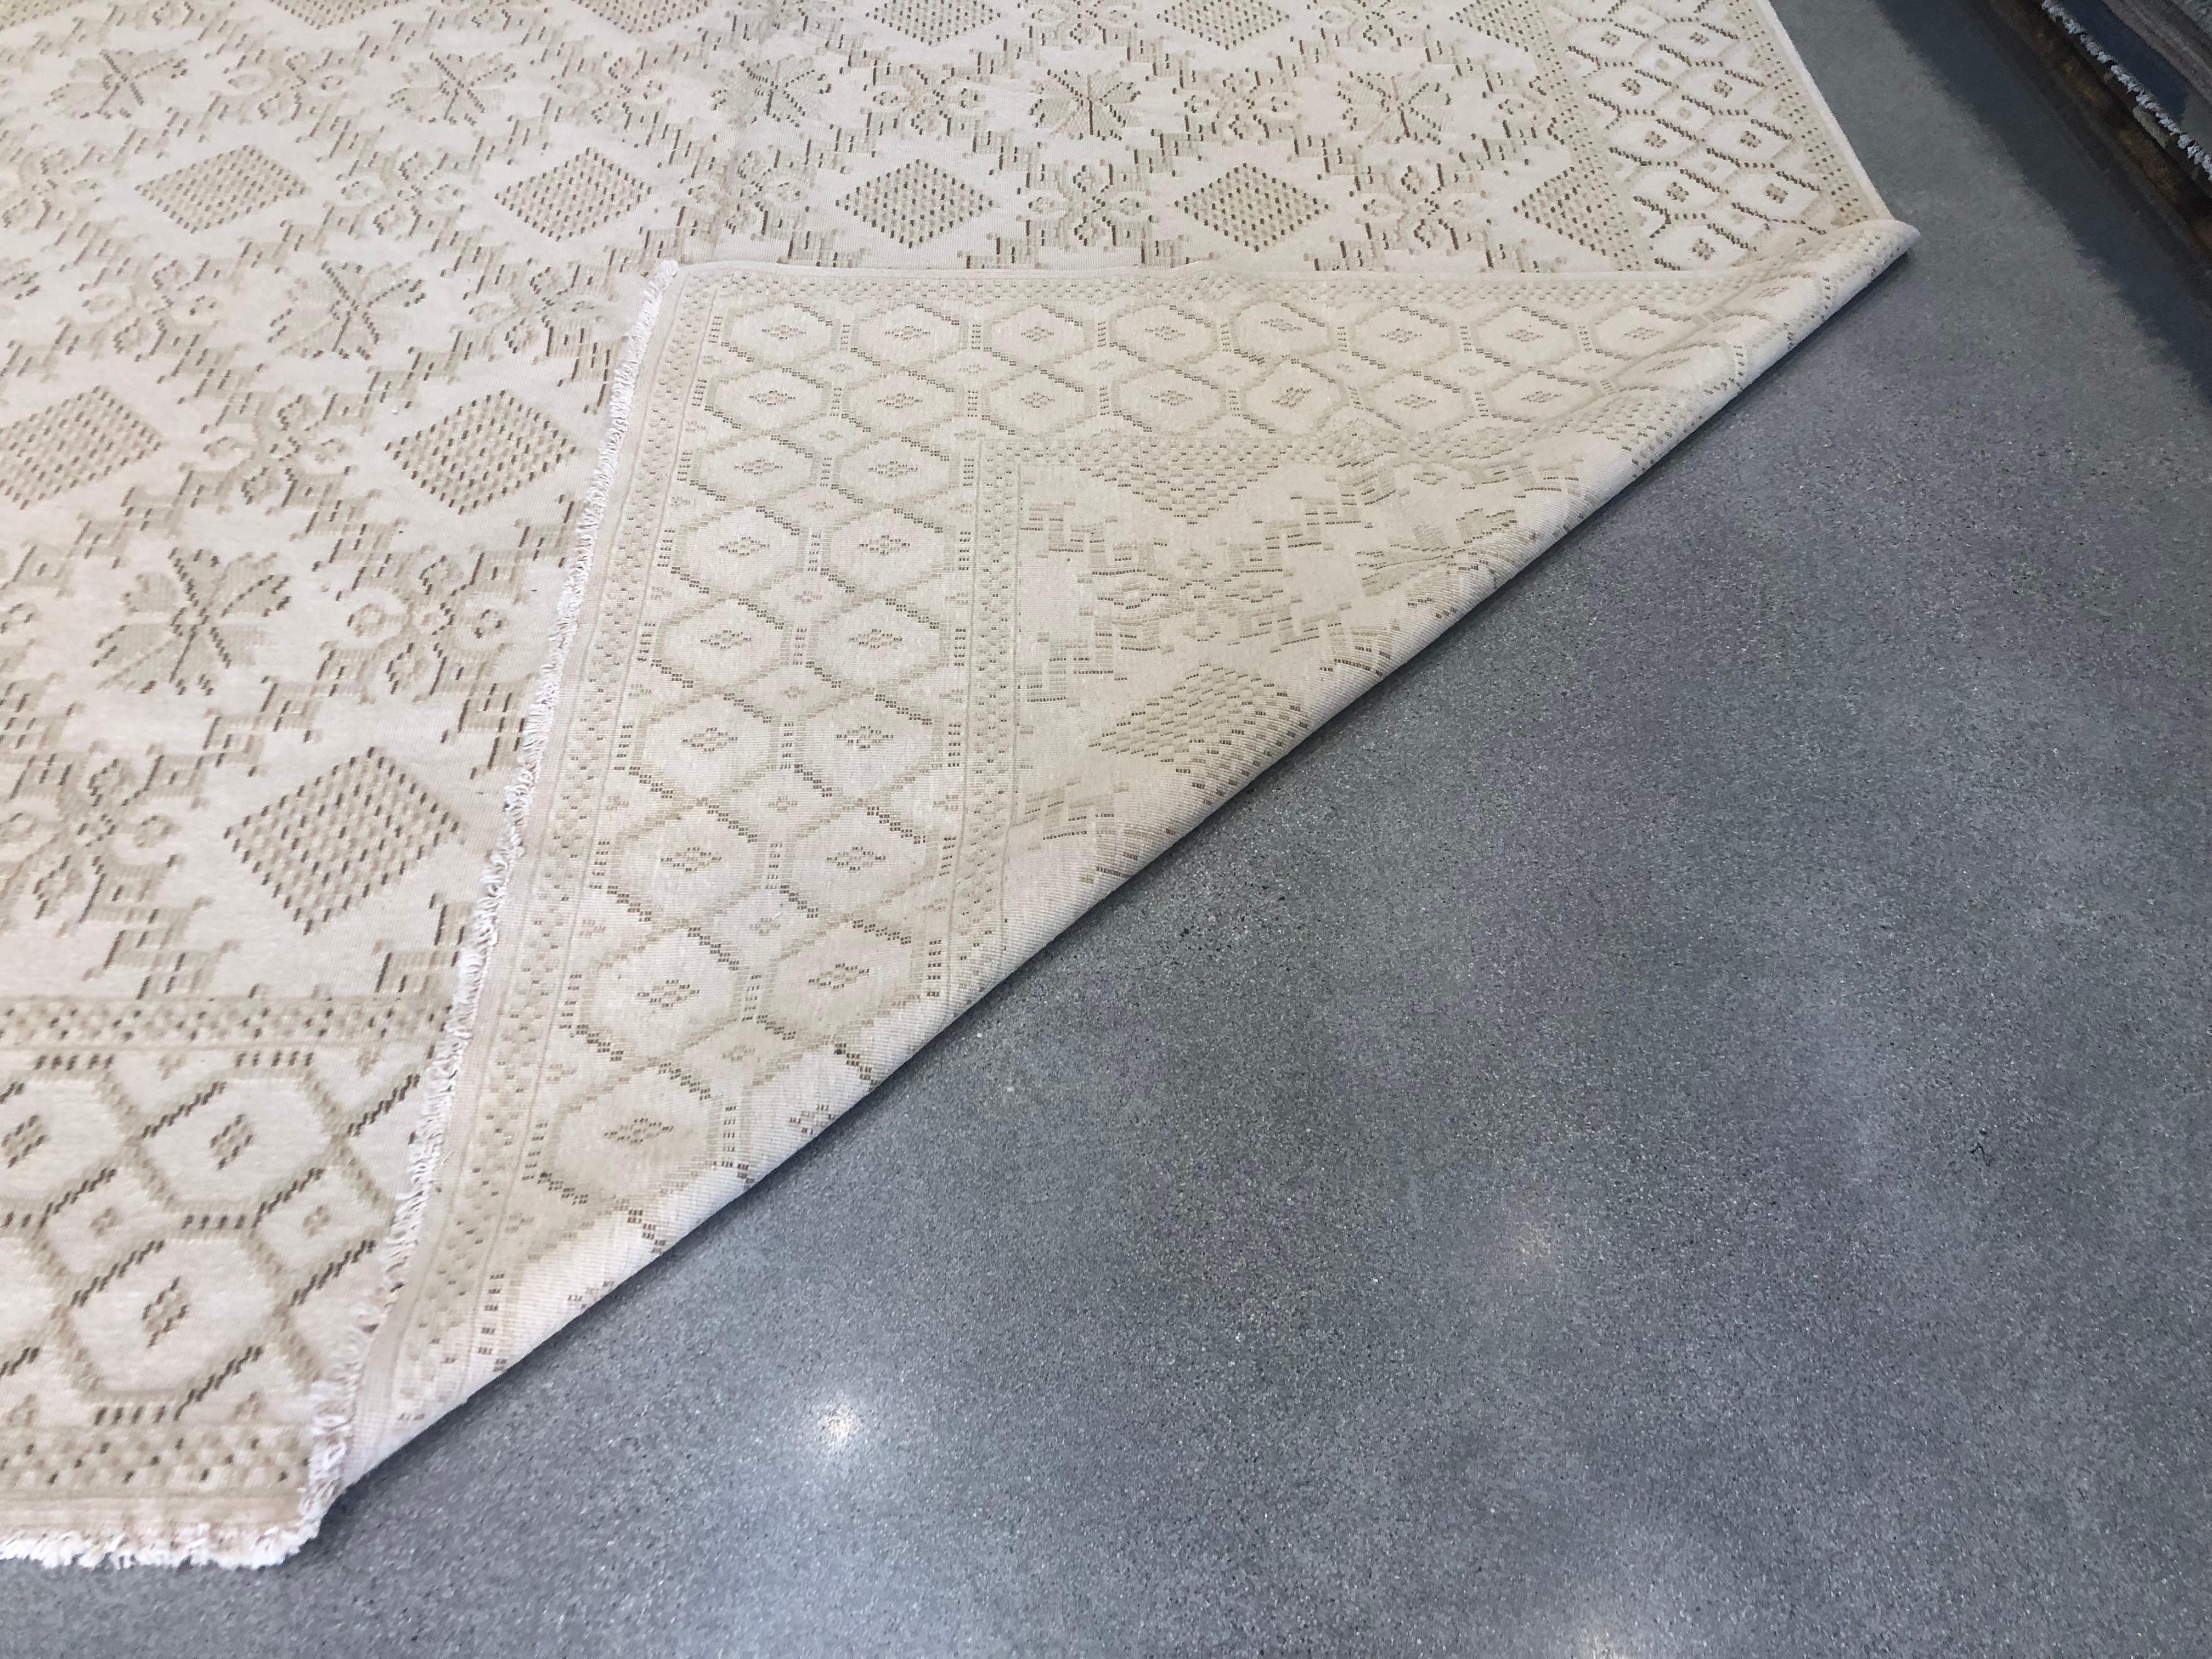 European Design Rug in Beige and Taupe In Excellent Condition For Sale In Los Angeles, CA